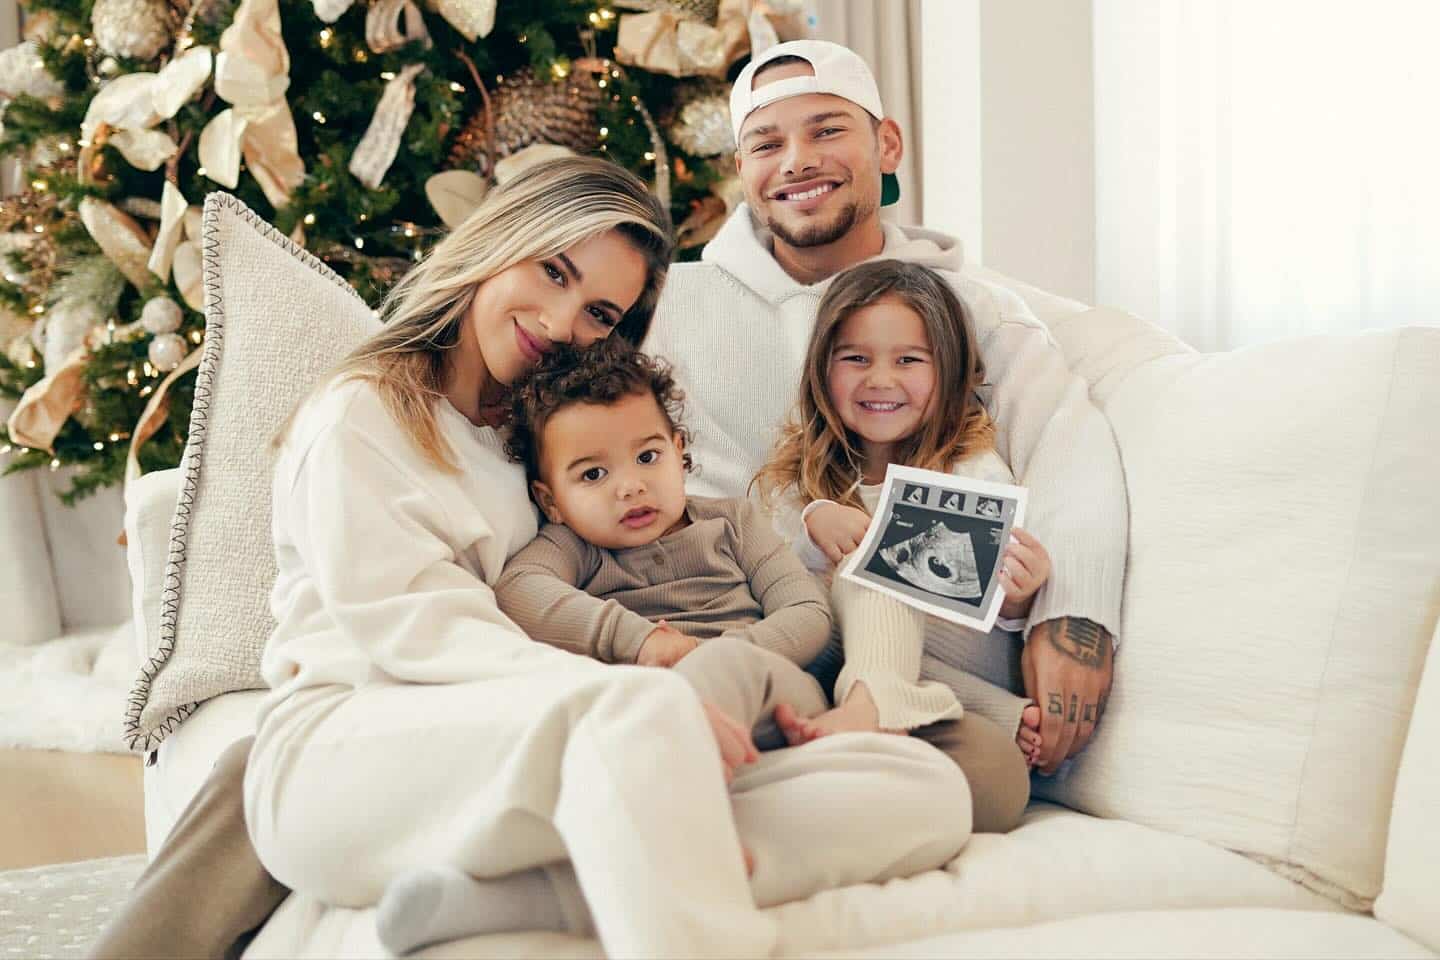 Kane Brown's oldest daughter, Kingsley, helped him pack for his upcoming tour. Kane and his wife Katelyn are expecting their third child this year.